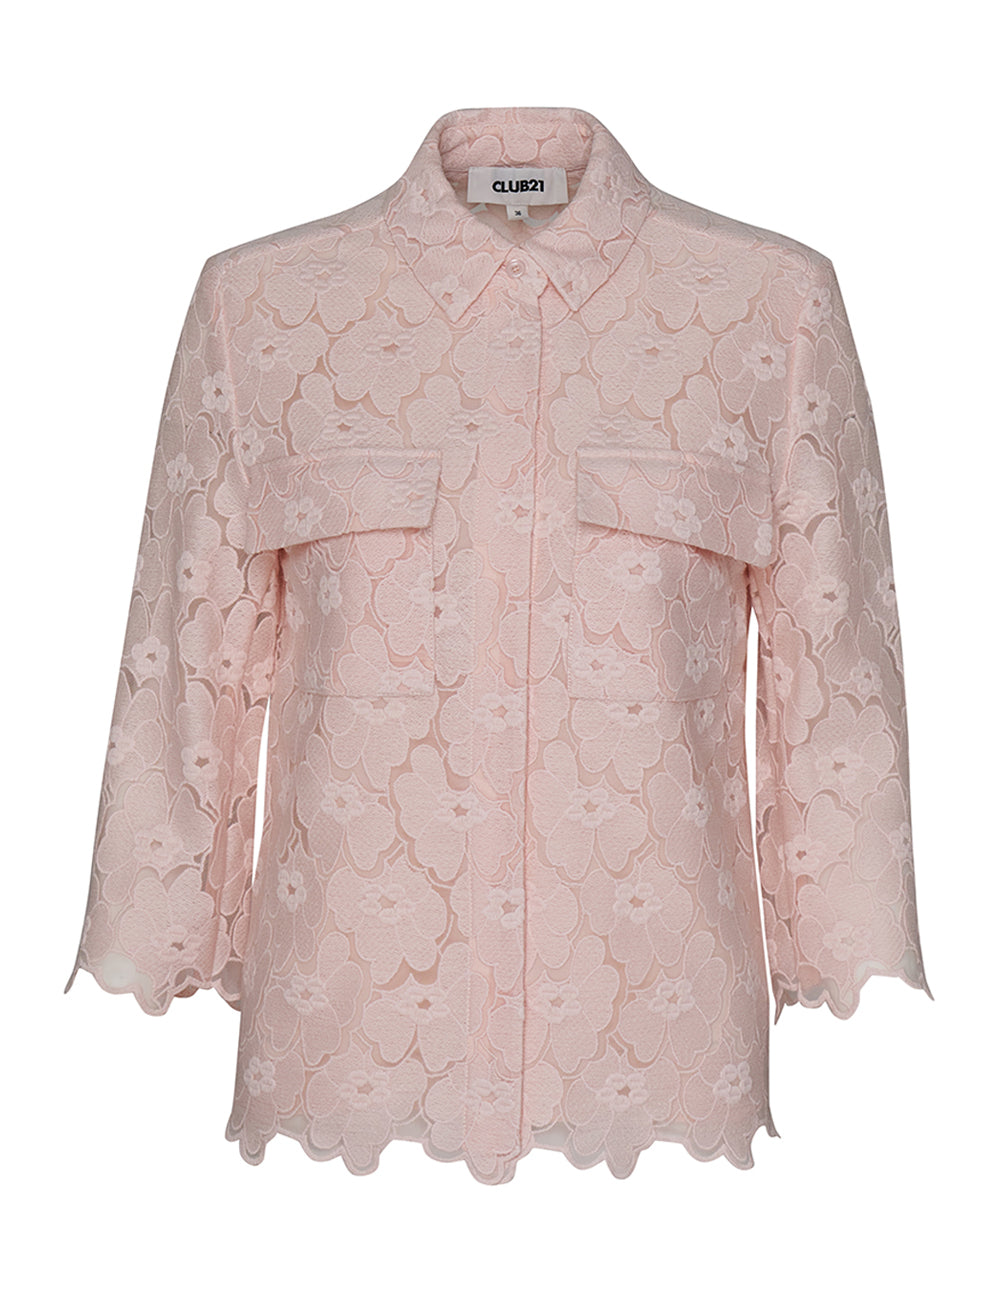 Club21 Collection Floral Lace Patch Shirt (Ivory)